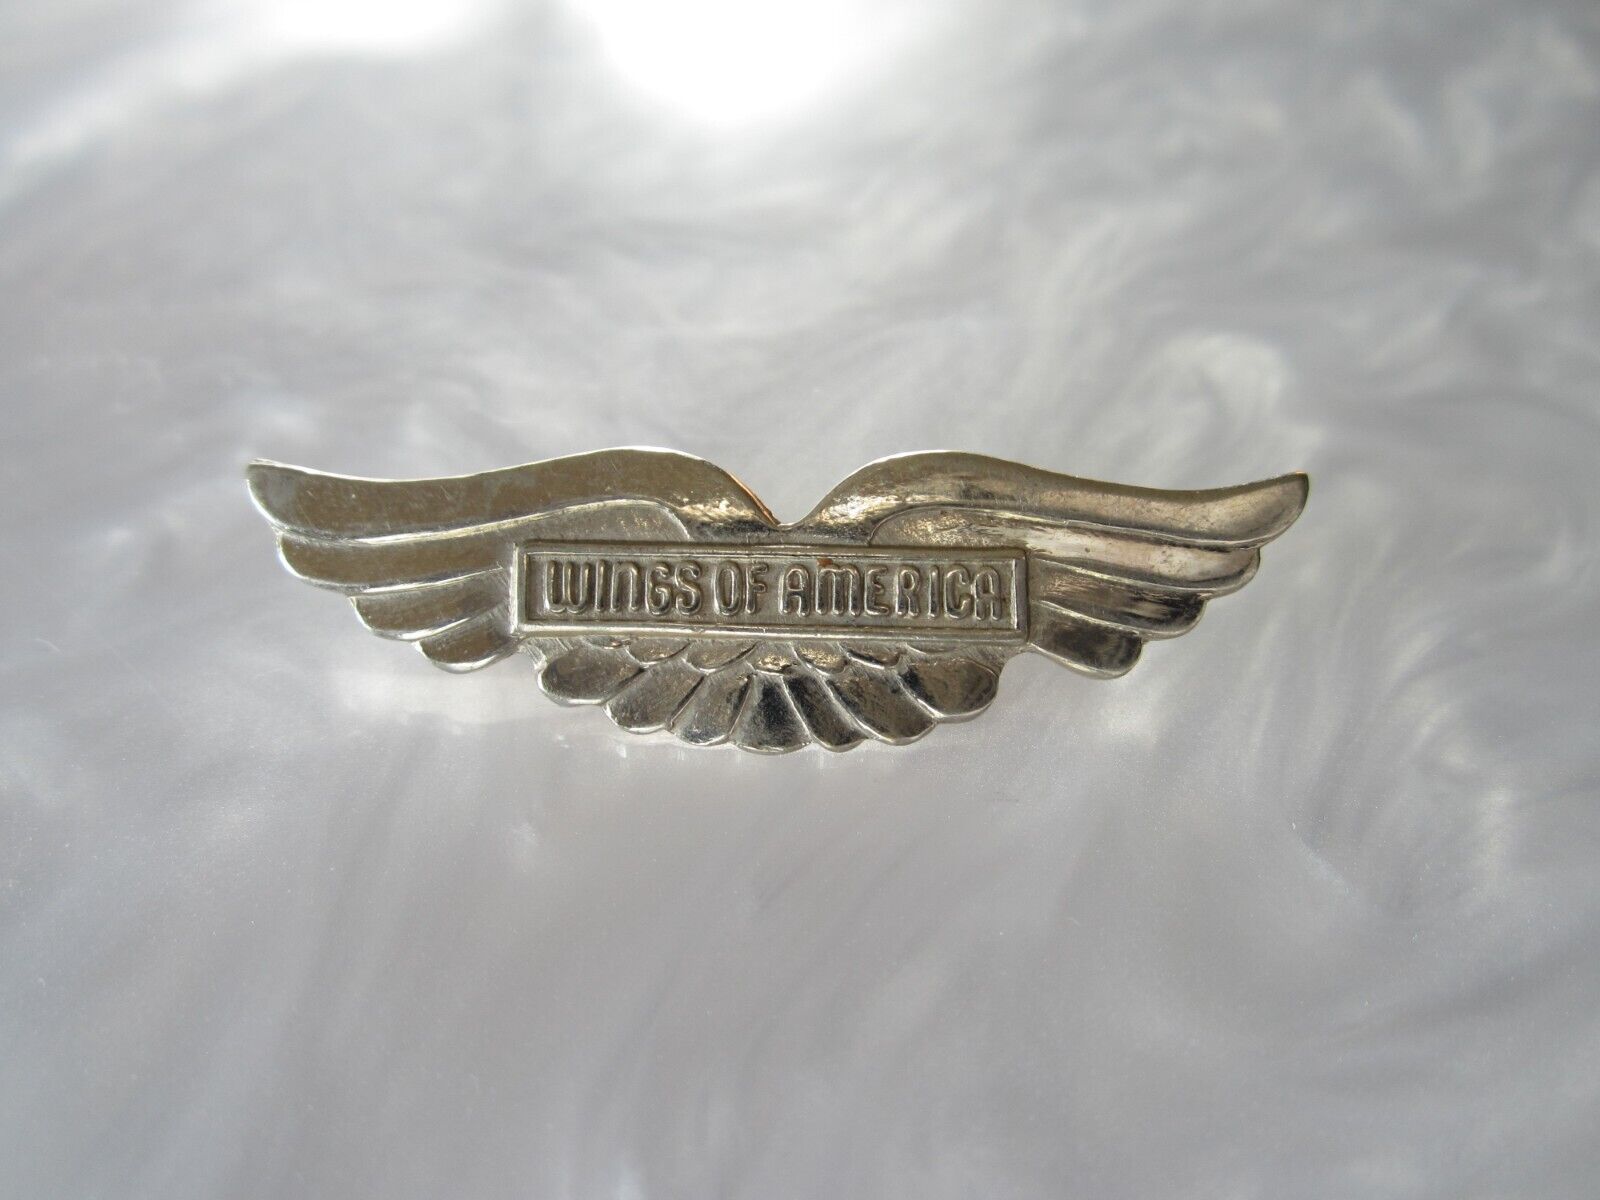 1940’S “WINGS OF AMERICA” PIN (ANOTHER IS IN THE SMITHSONIAN AIR & SPACE MUSEUM)